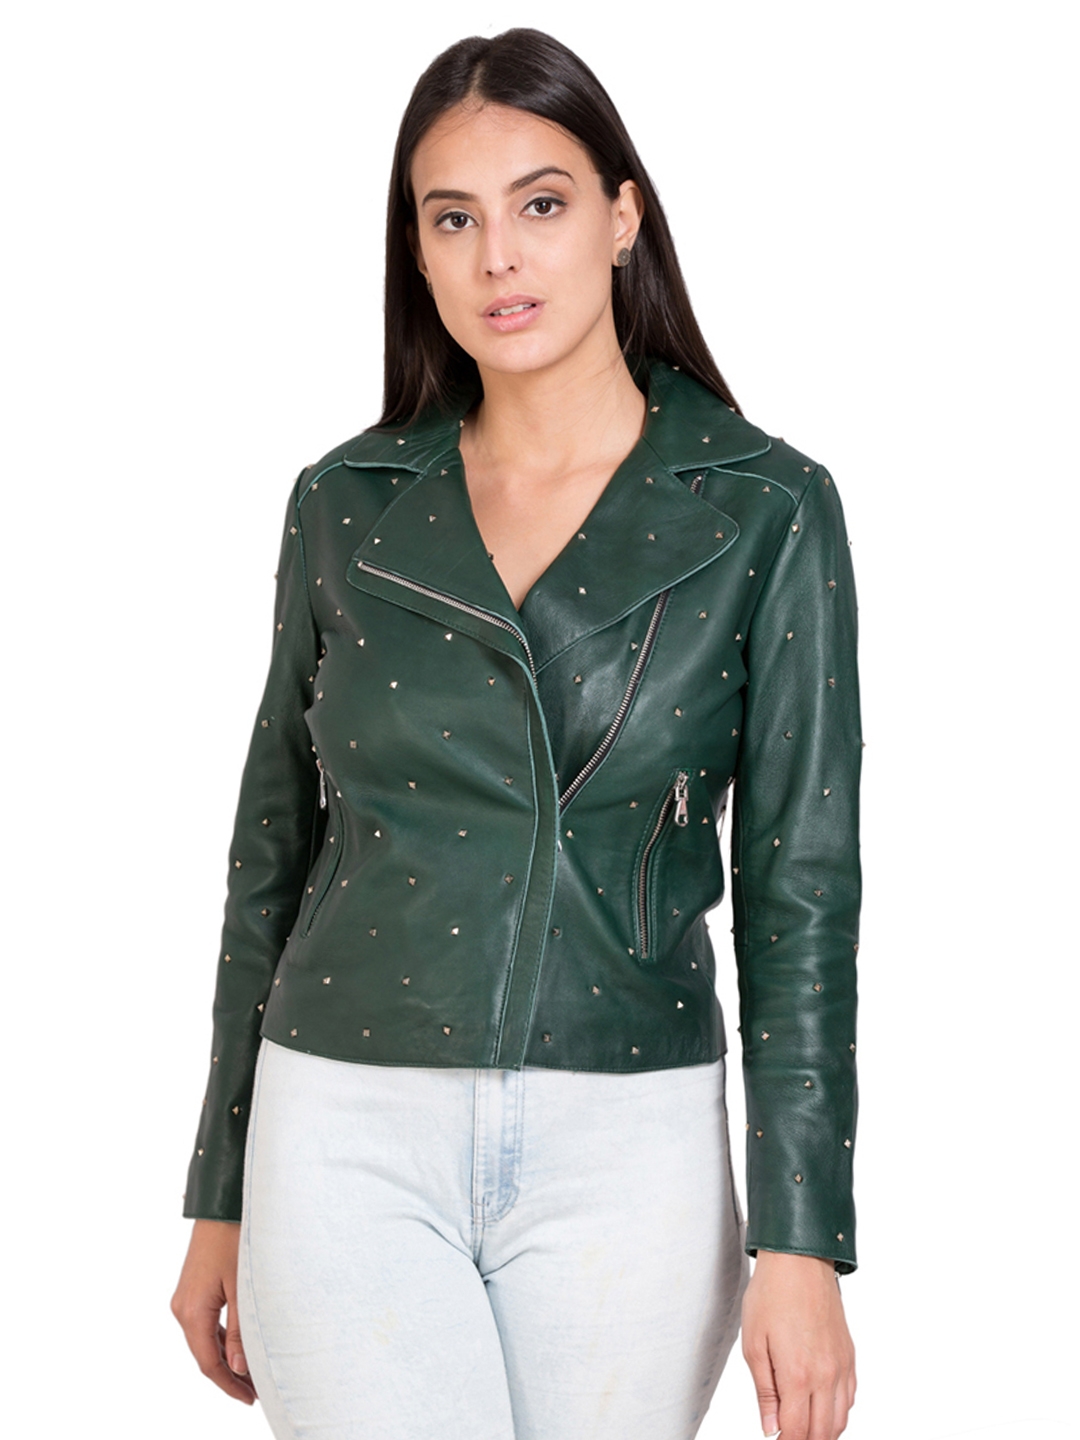 Justanned | Justanned Women Green Genuine Real Leather Jacket